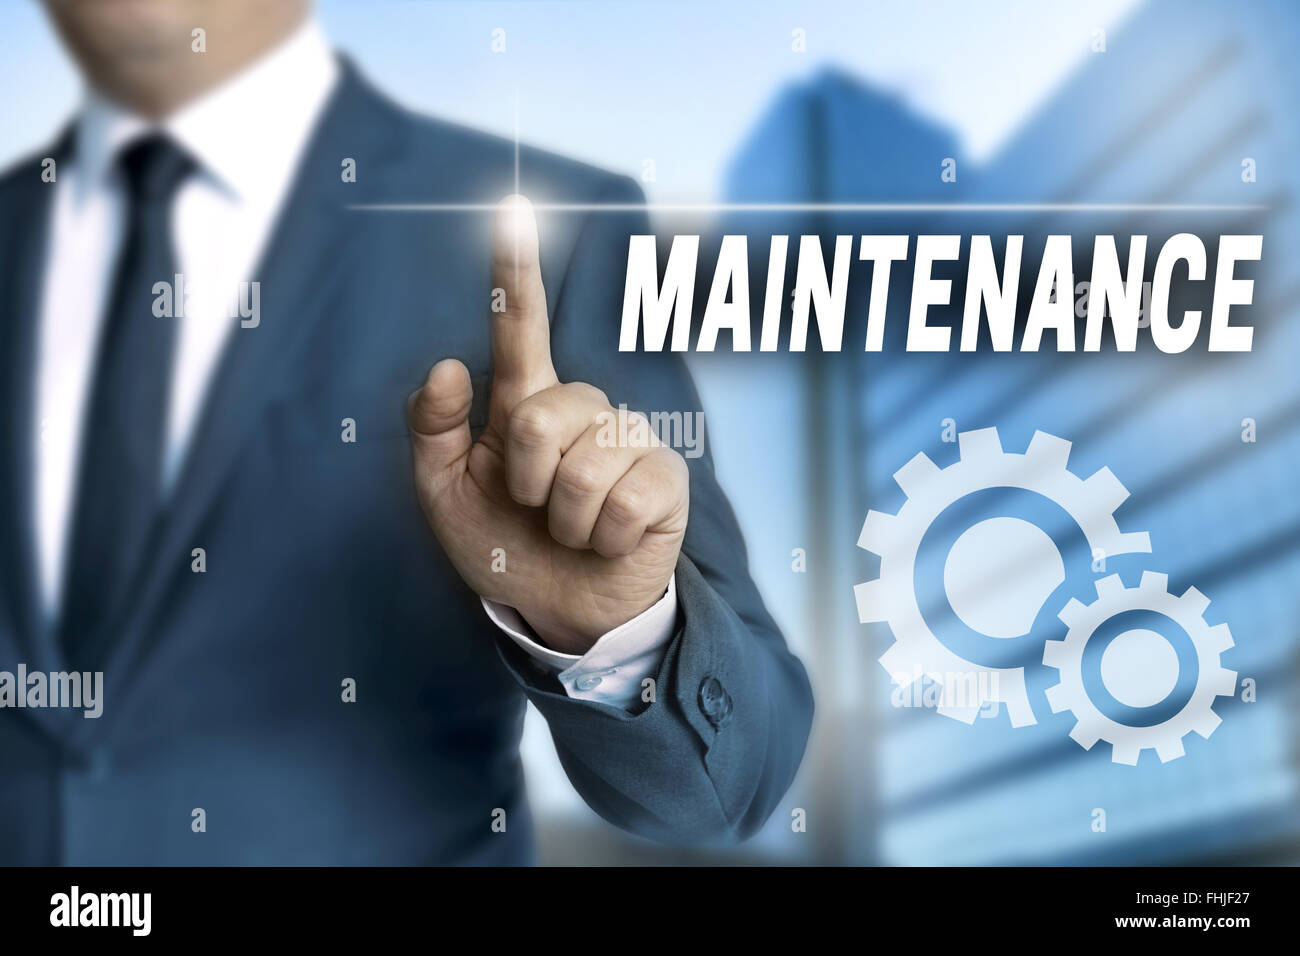 maintenance touchscreen is operated by businessman. Stock Photo